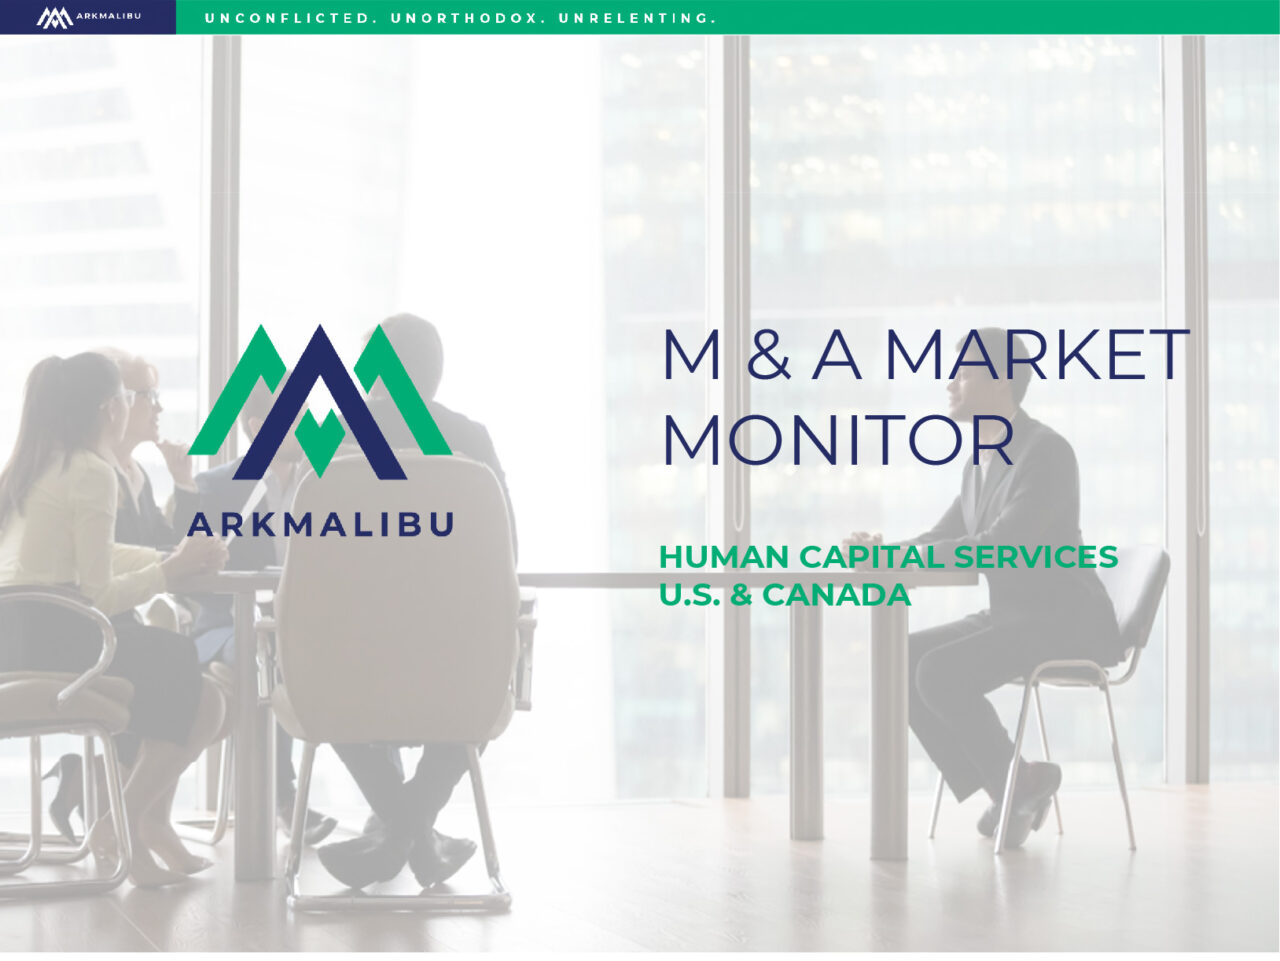 Market Monitor Cover for Human Capital Services. Faded Image of a meeting room of people in the background